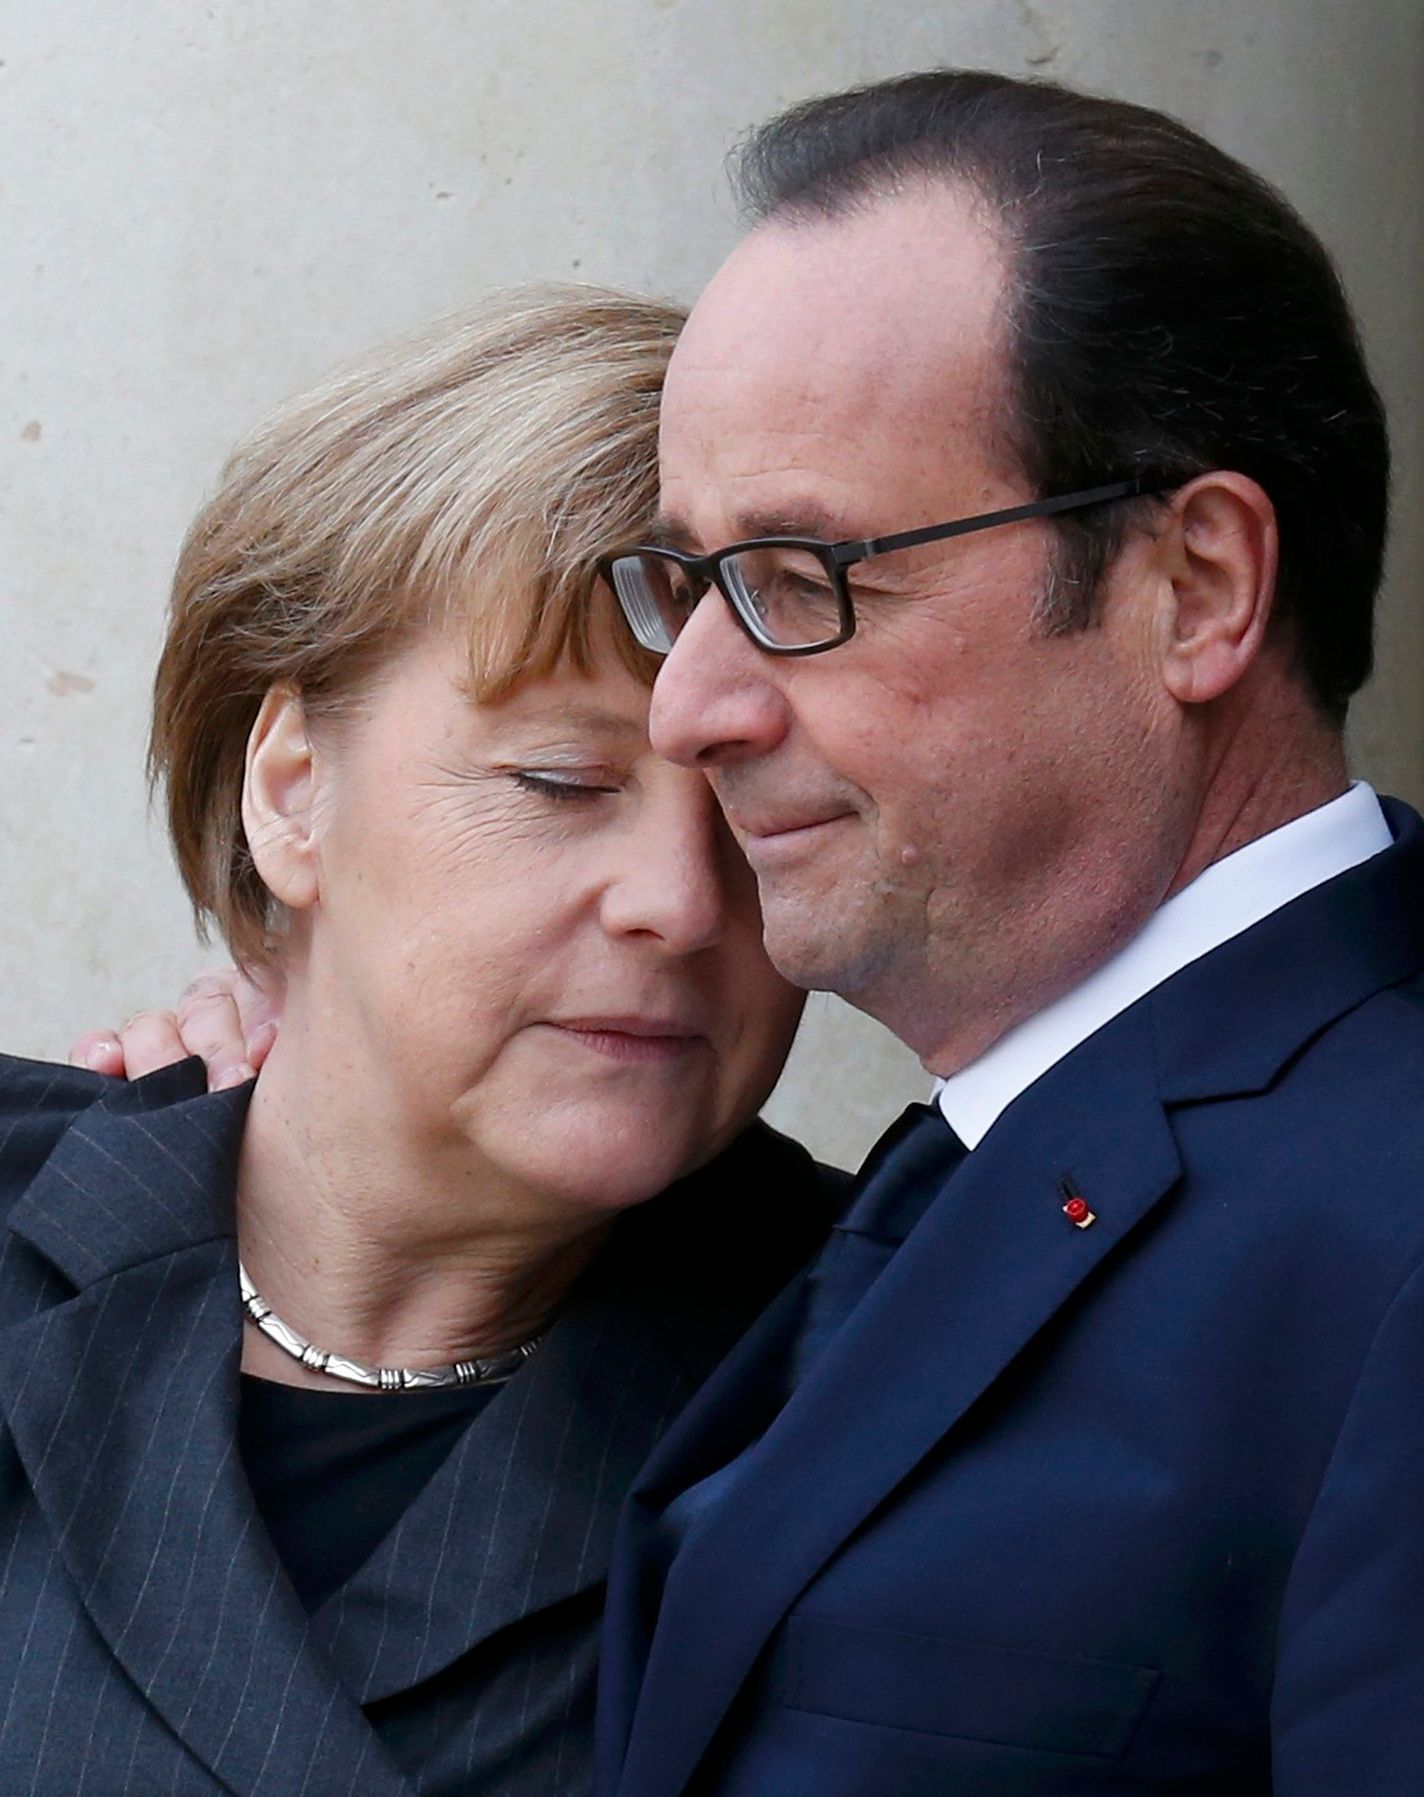 French President Hollande welcomes Germany's Chancellor Merkel as she arrives at the Elysee Palace before the solidarity marchin the streets of Paris